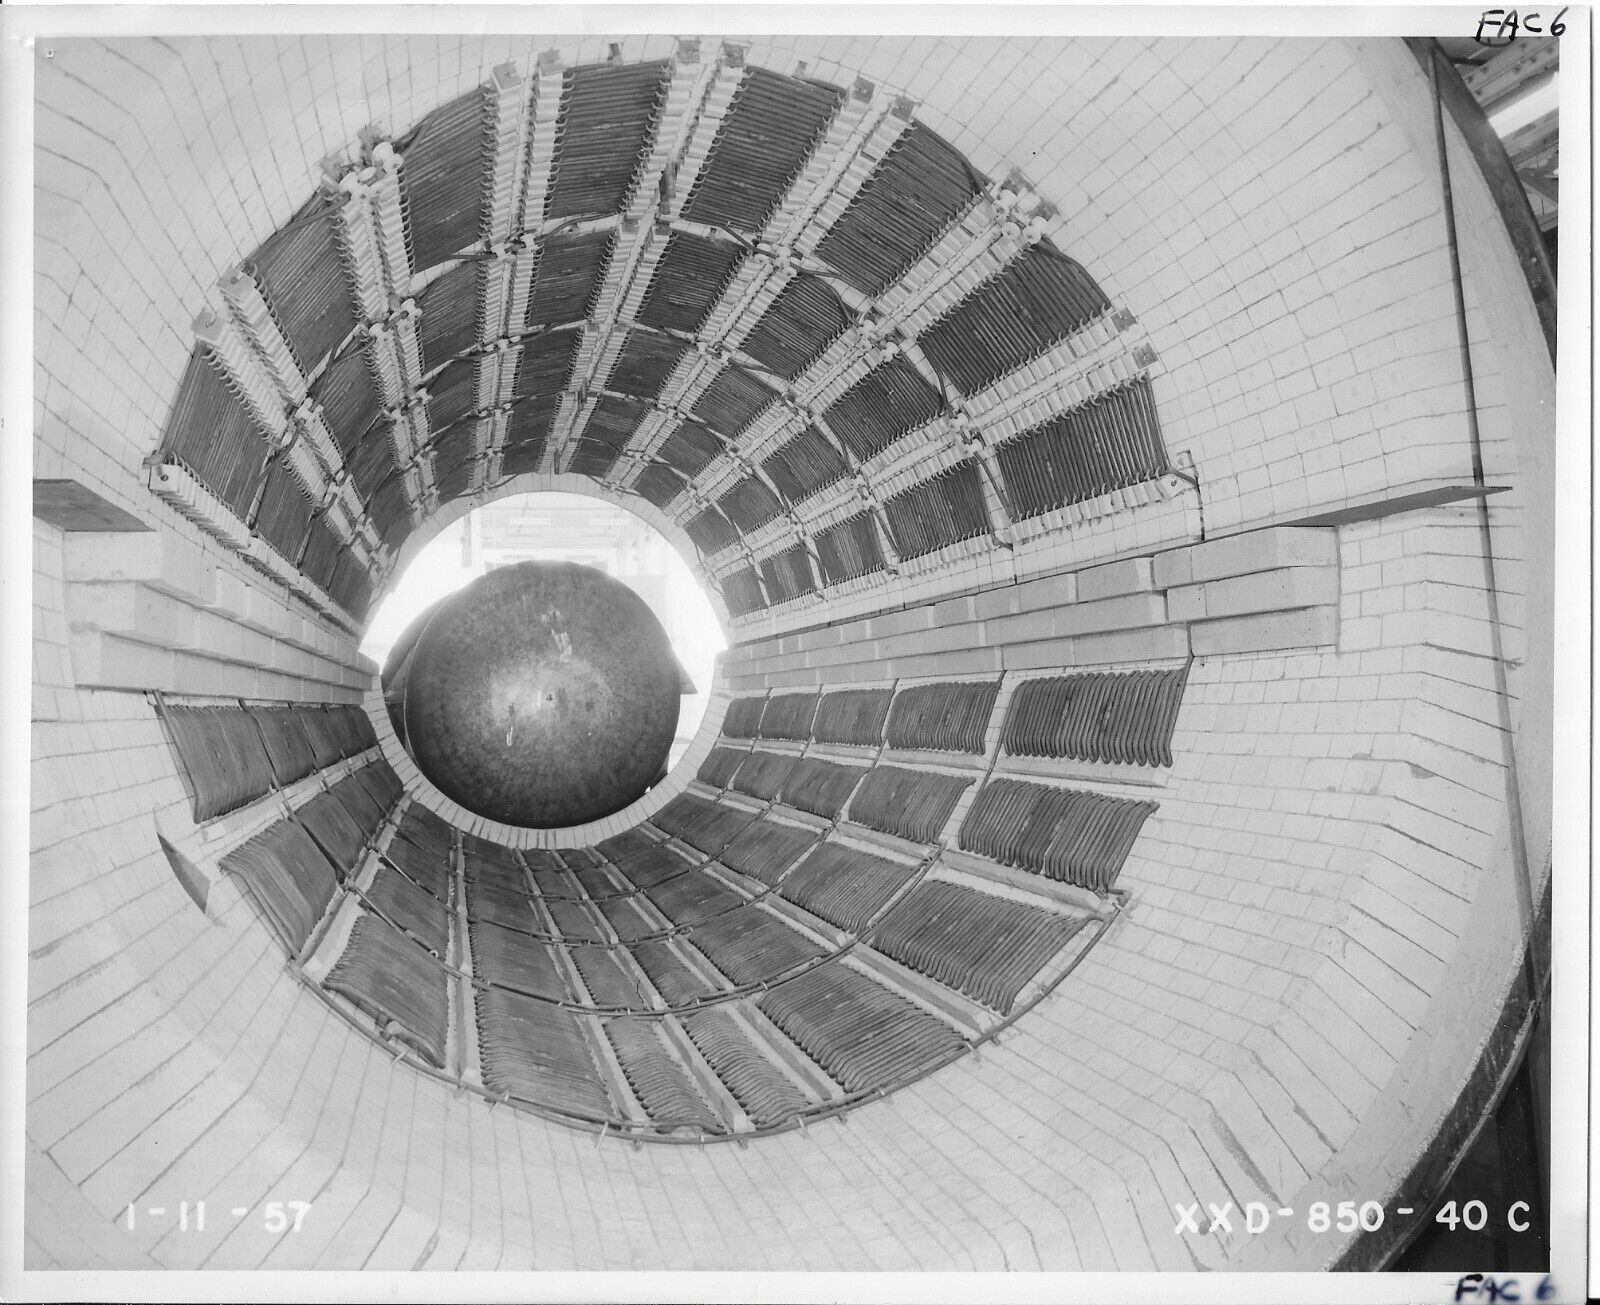 HEAT TREATING VACUUM FURNACE FOR SM-64 MISSILE 1957 8\